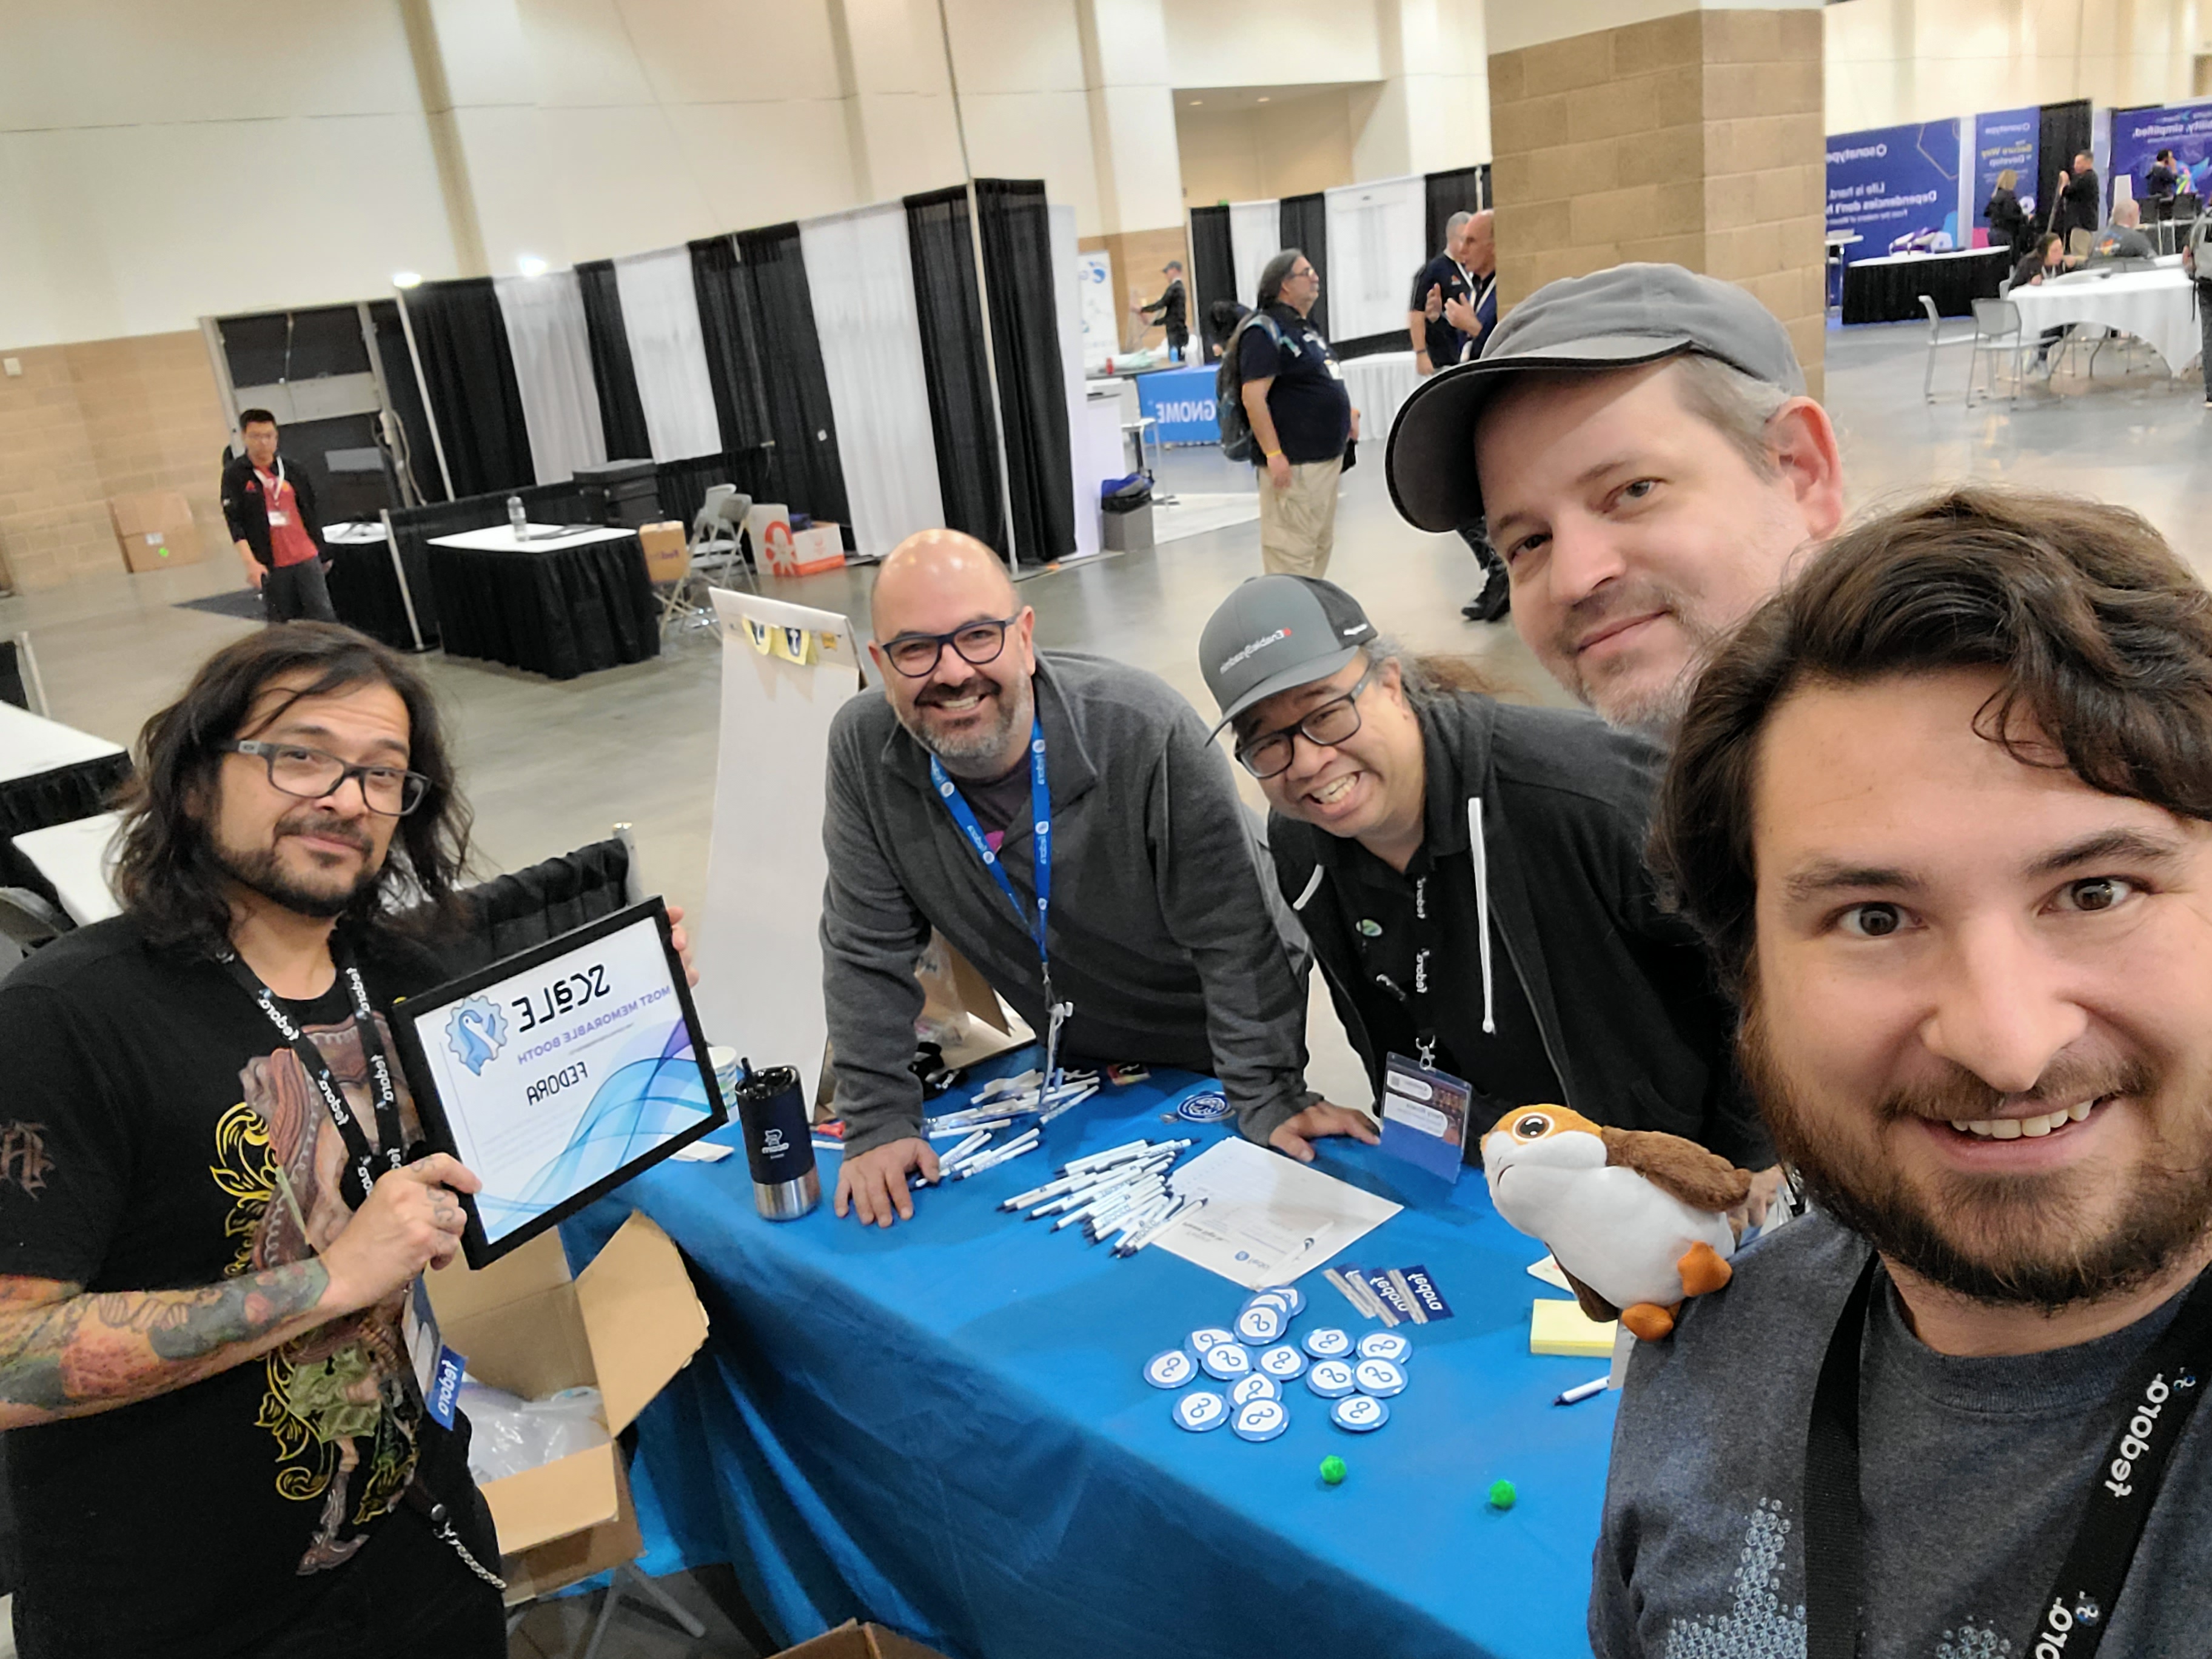 Fedora Ambassadors around a table in the exhibit hall